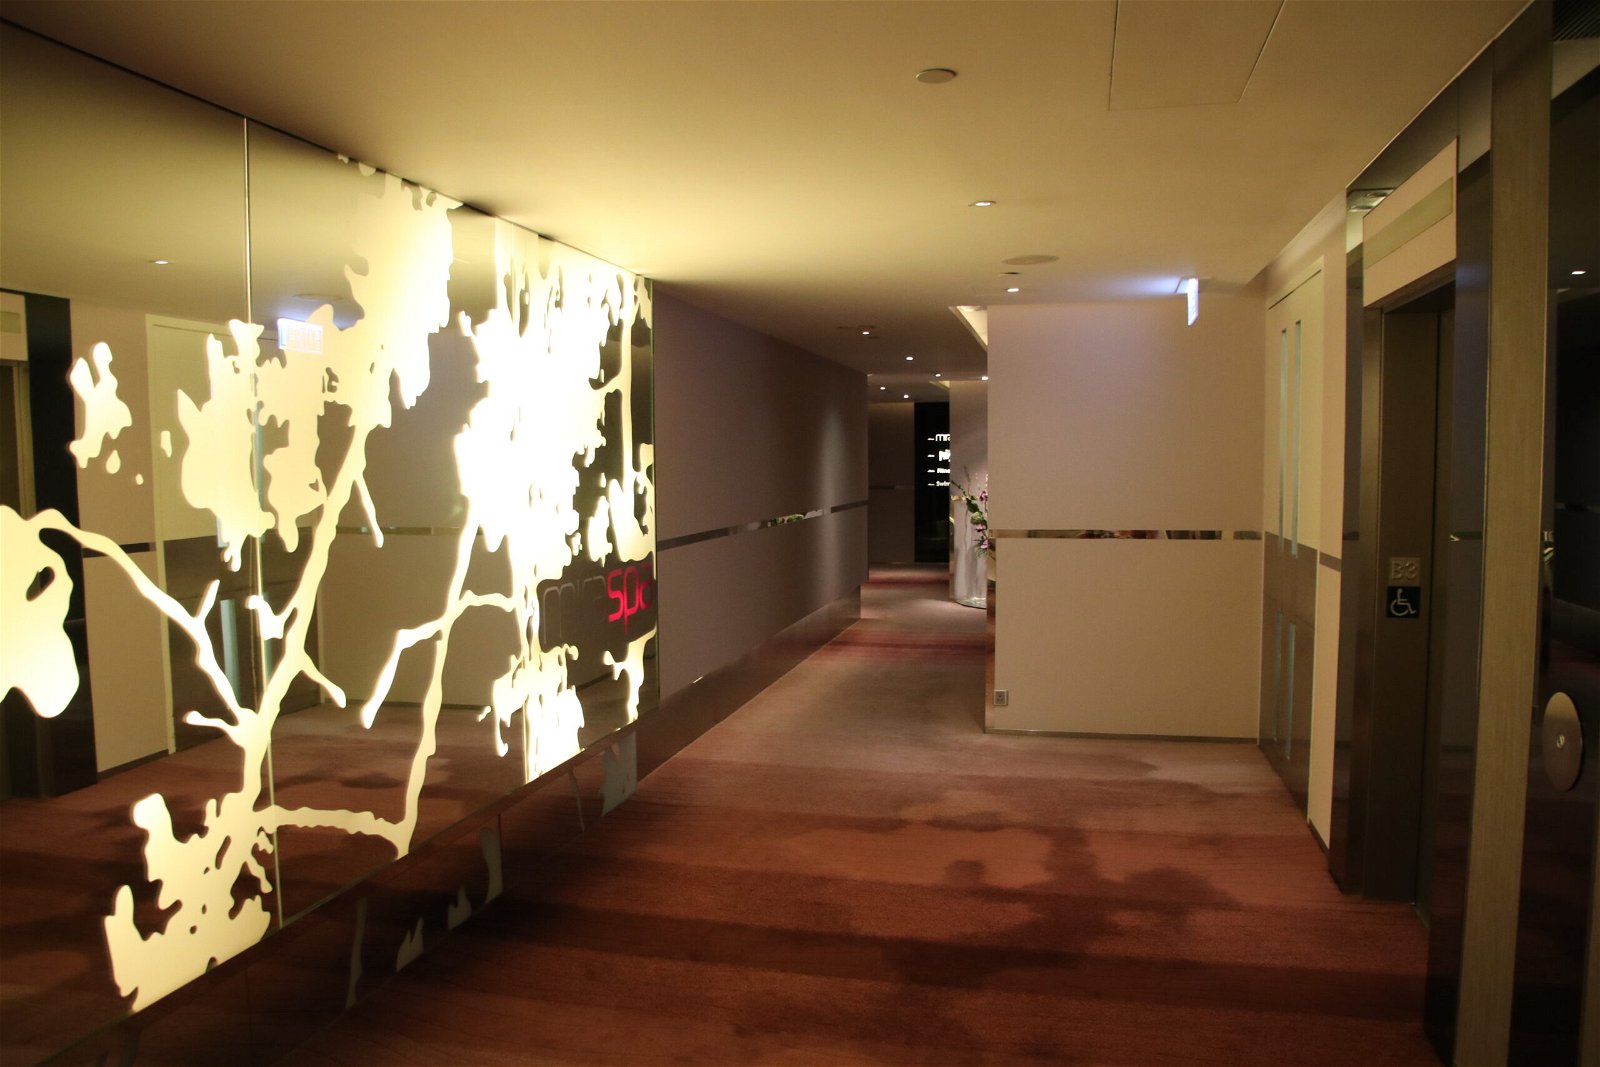 The corridor on the floor with the spa.